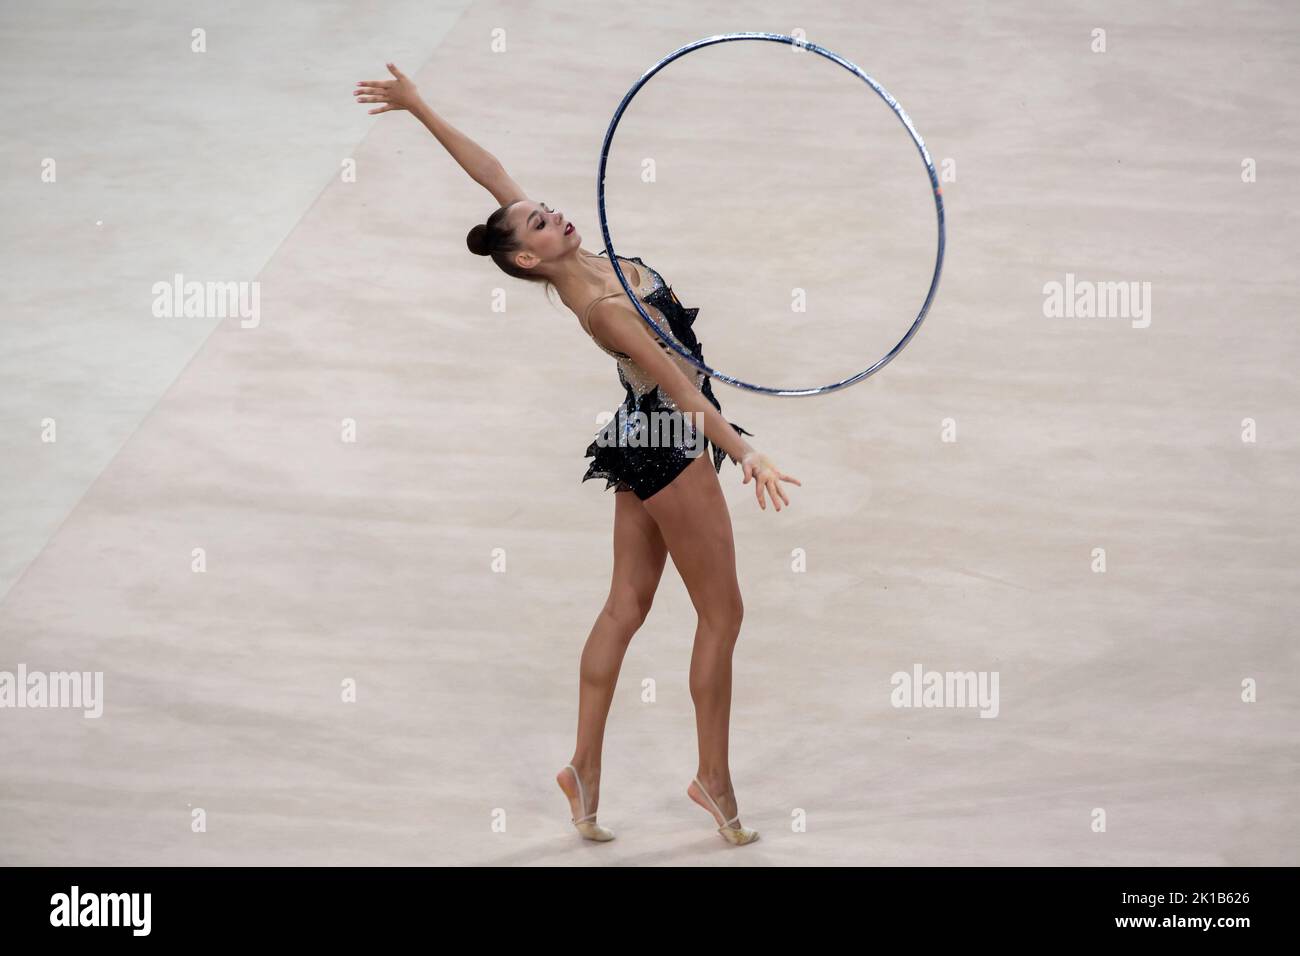 Moscow, Russia. 12th of September, 2022. Anastasia Guzenkova performs her hoop routine in a qualification at the 2022 All-Russian Summer Spartakiad in Rhythmic Gymnastics at Irina Viner-Usmanova Gymnastics Palace in Luzhniki in Moscow, Russia Stock Photo